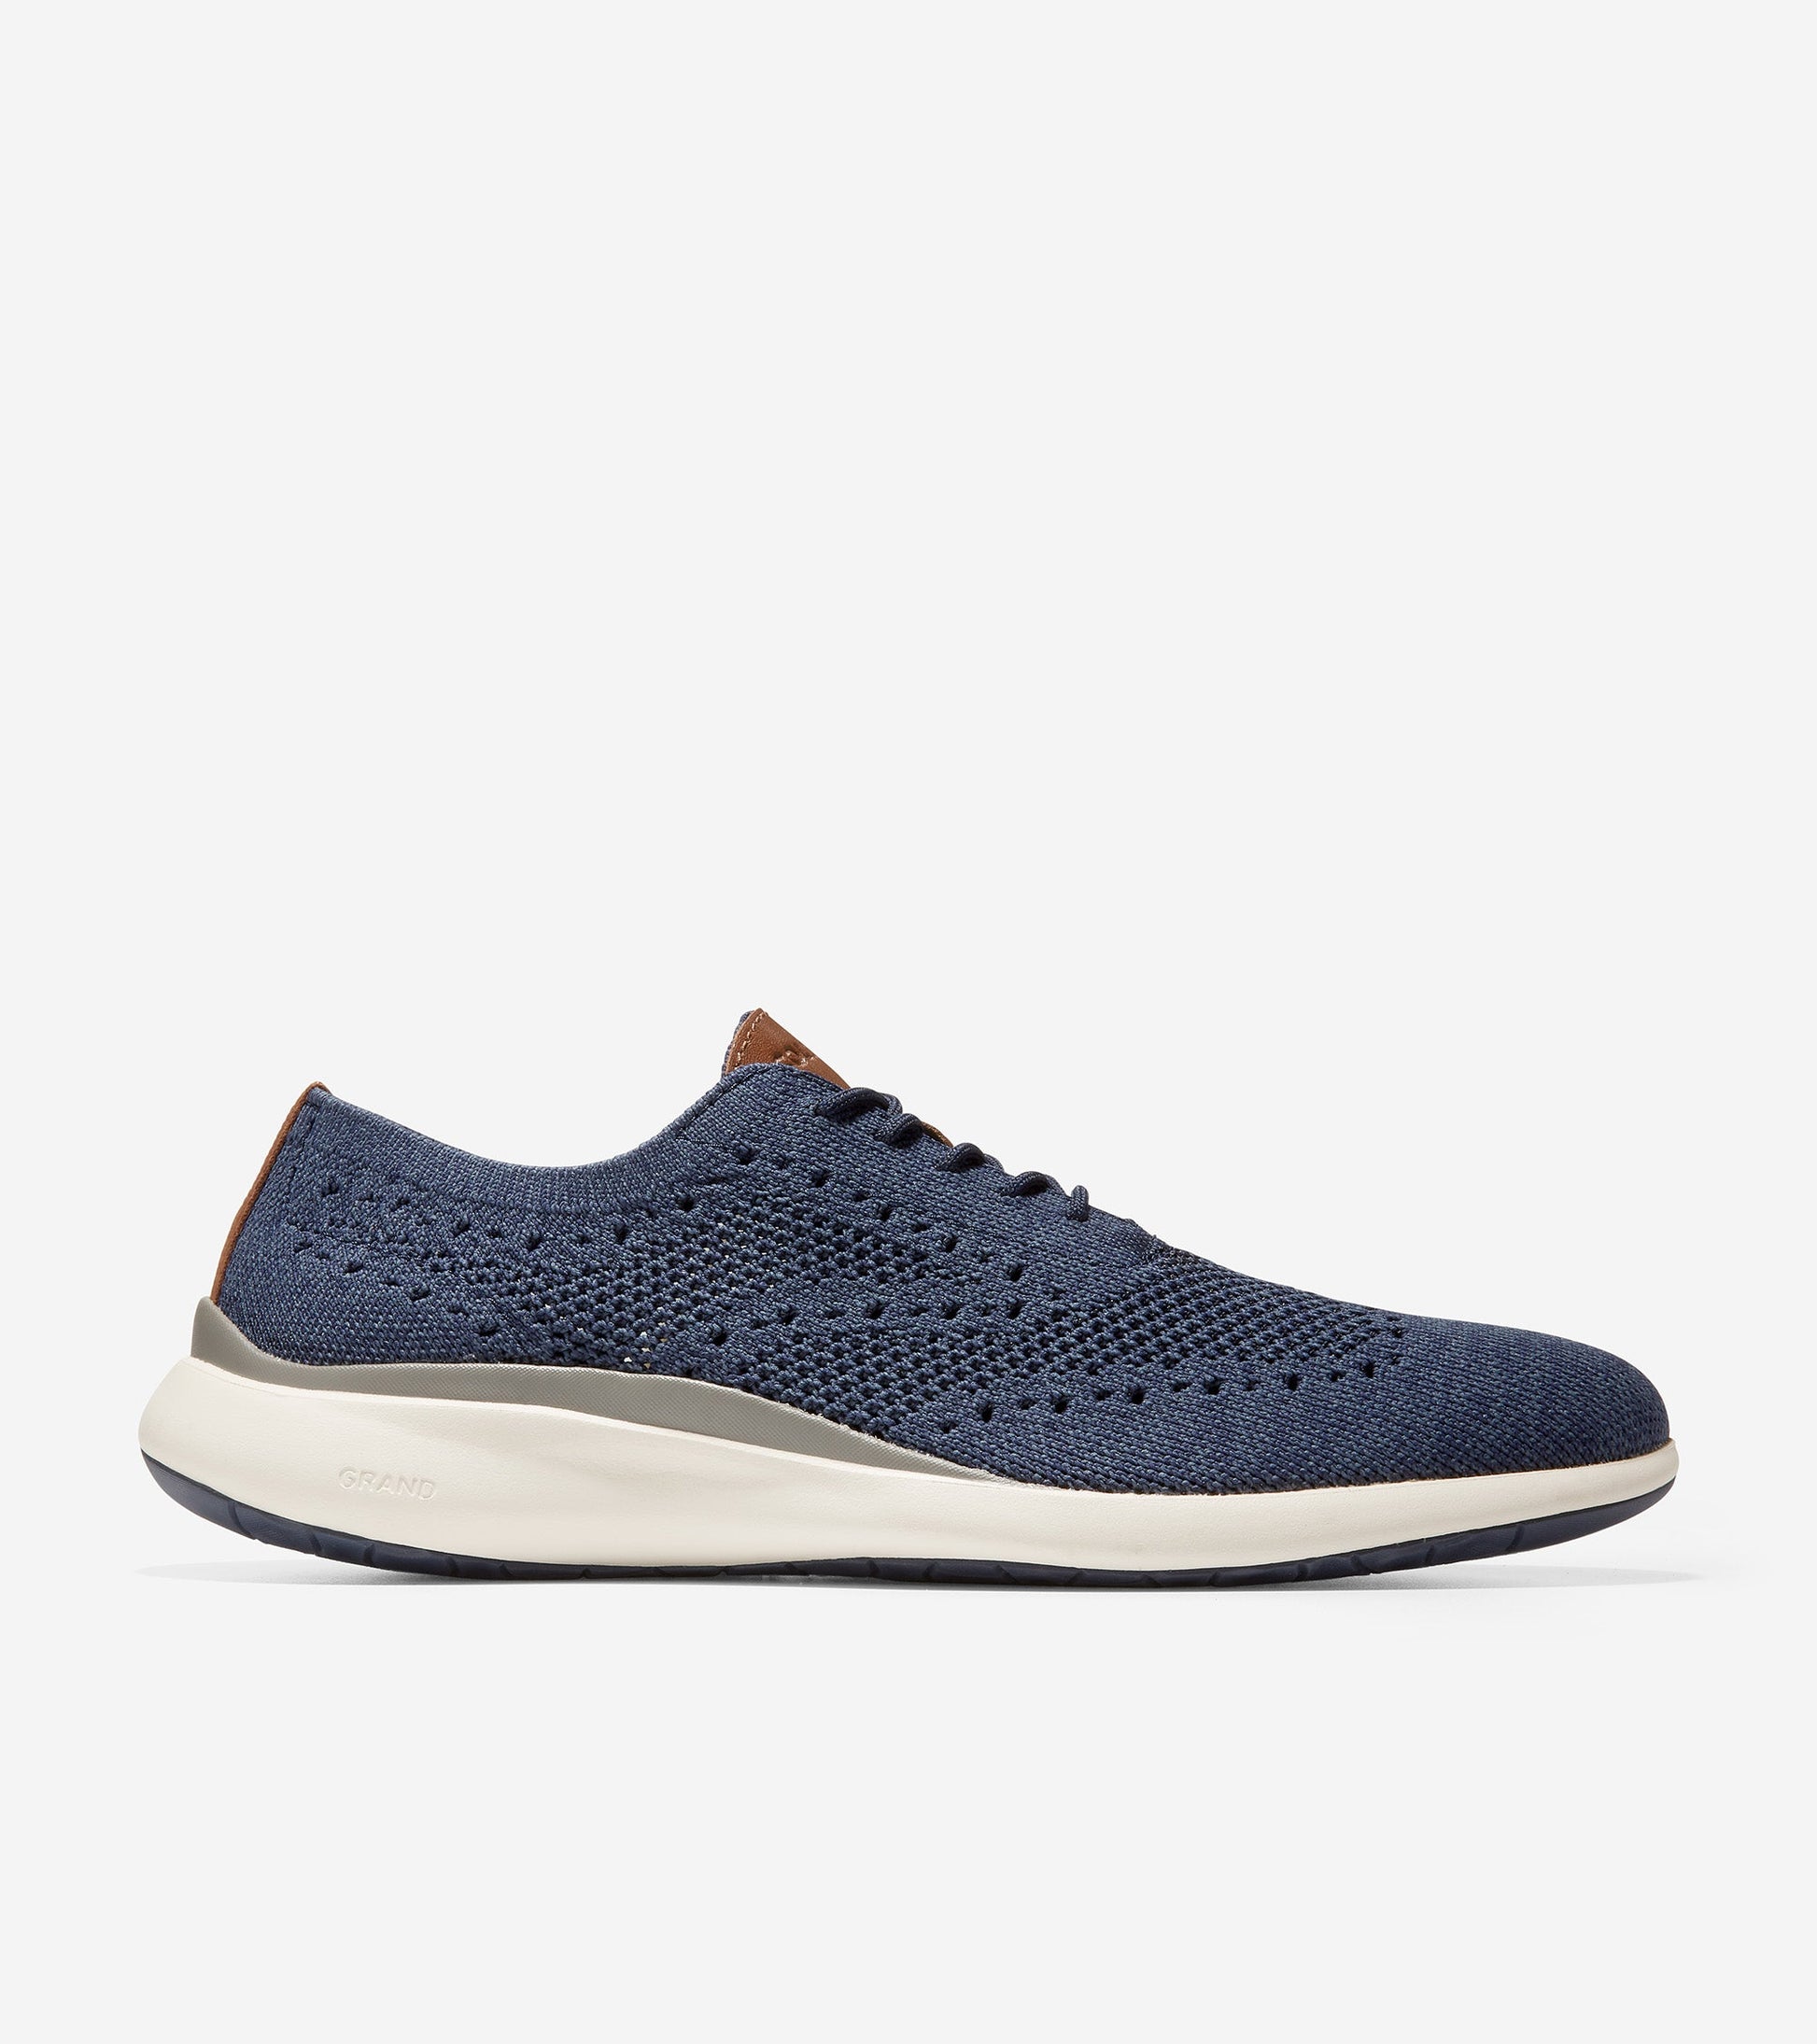 Grand Troy Knit Oxford Marine/Ombre Blue Knit - CH